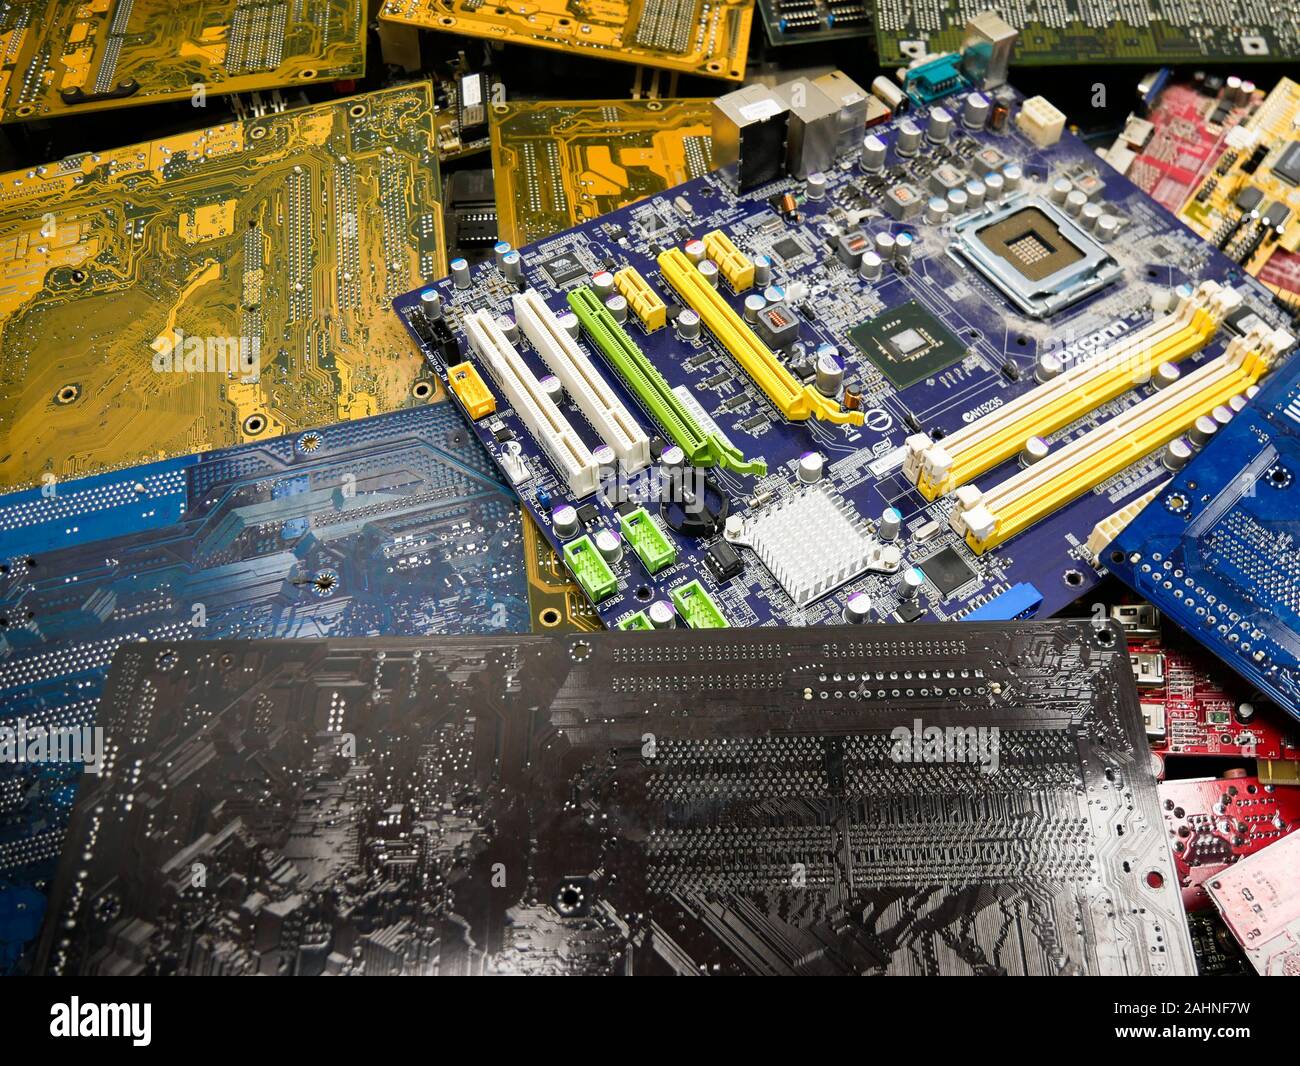 Wien/Austria - june 4 2019: pile of discarded computer mother boards  sorted on a bin  in a recycling and recovery compound in vienna Stock Photo